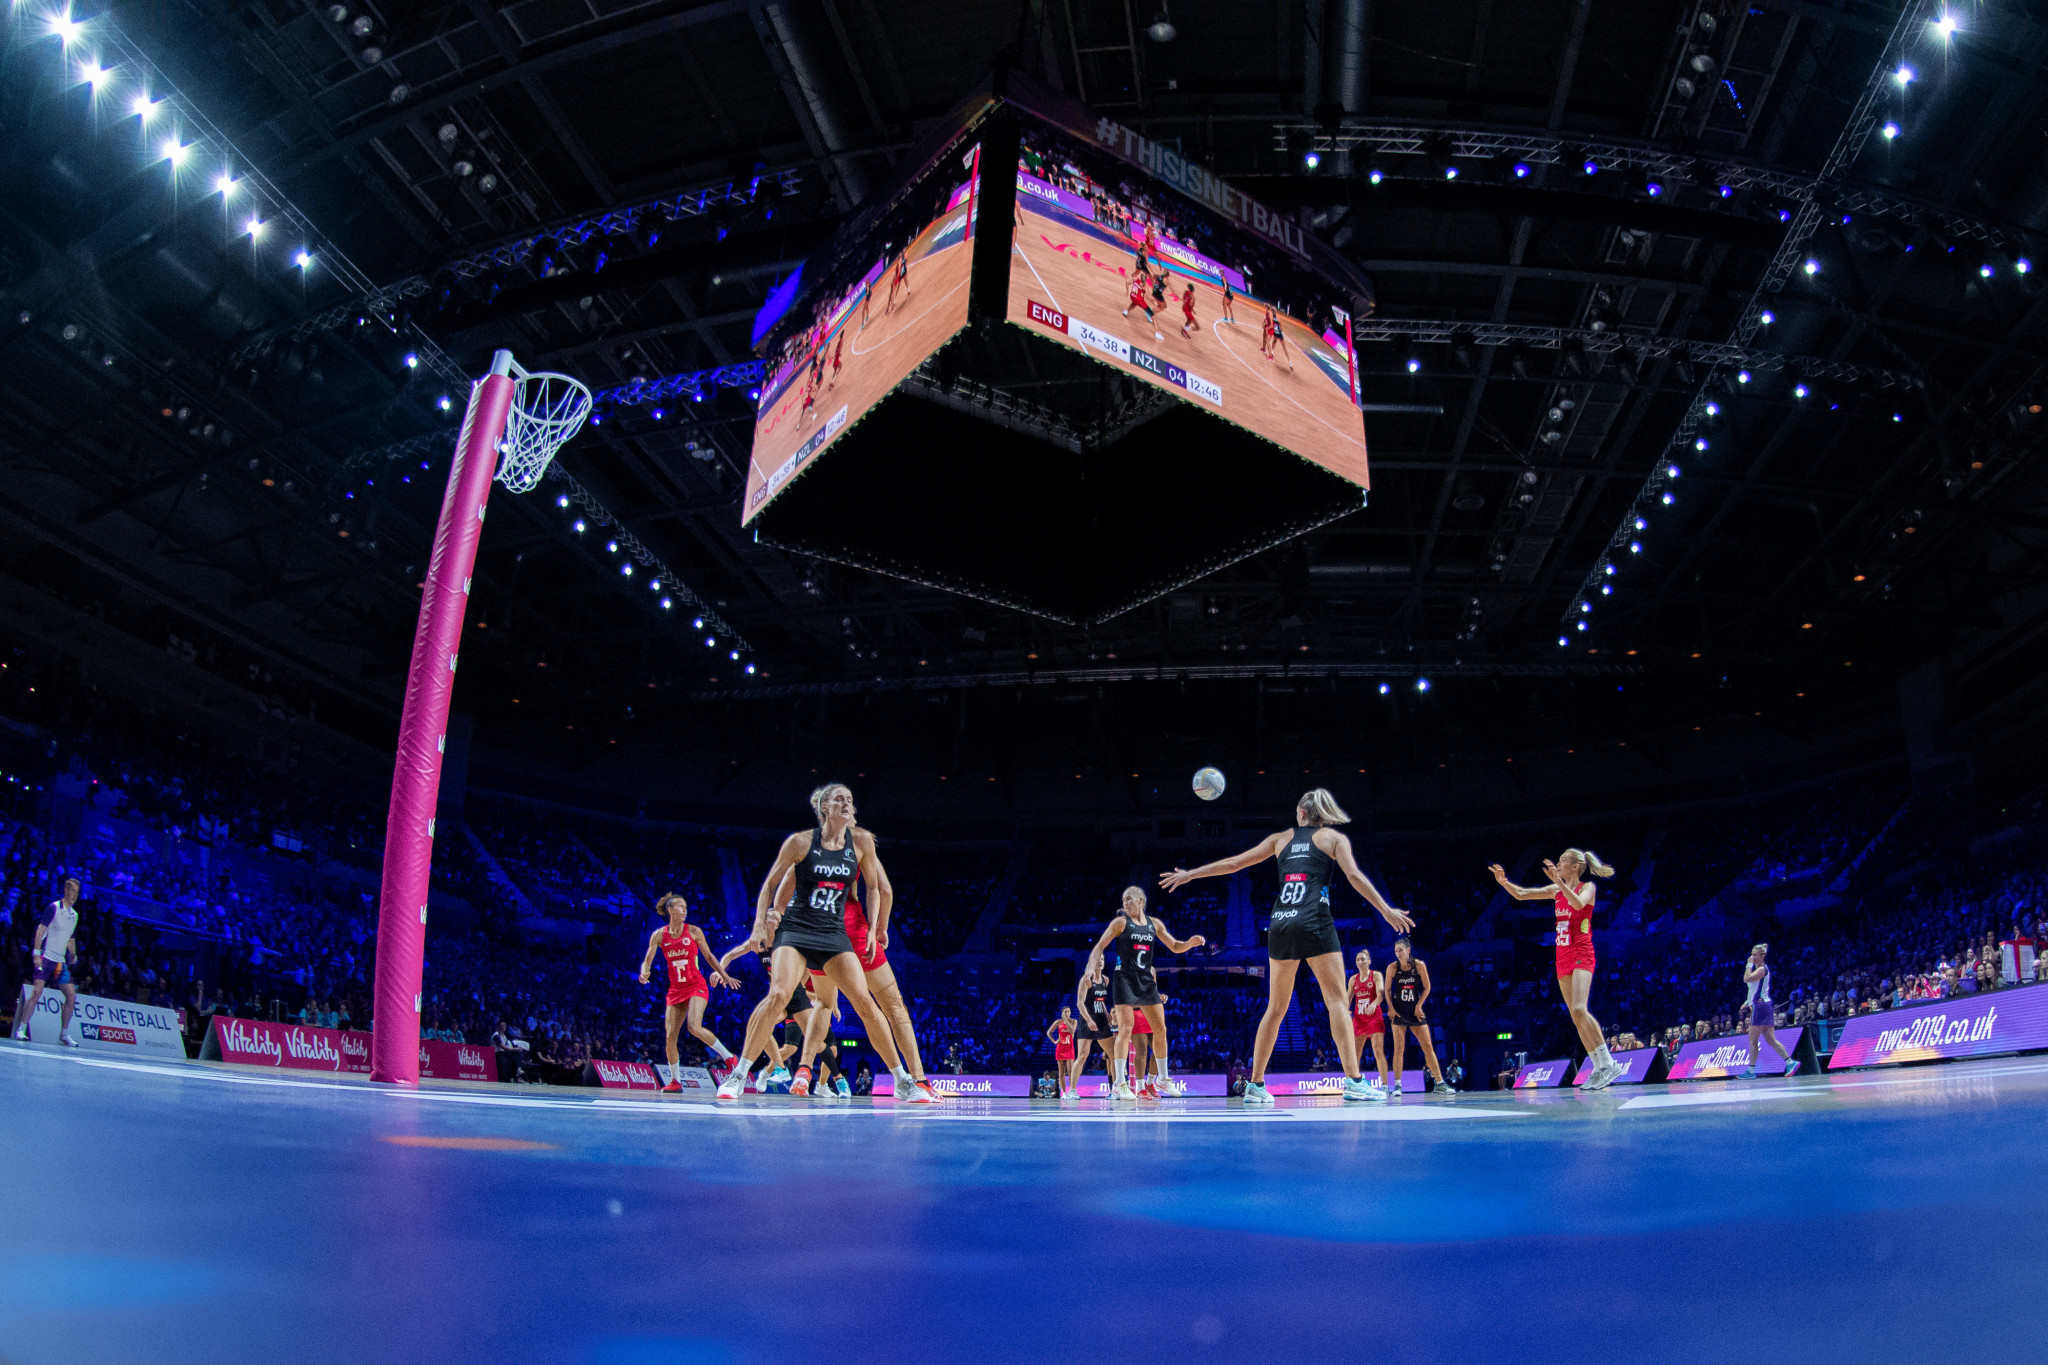 The appointment of an athlete director to World Netball's governing Board is being seen as a 